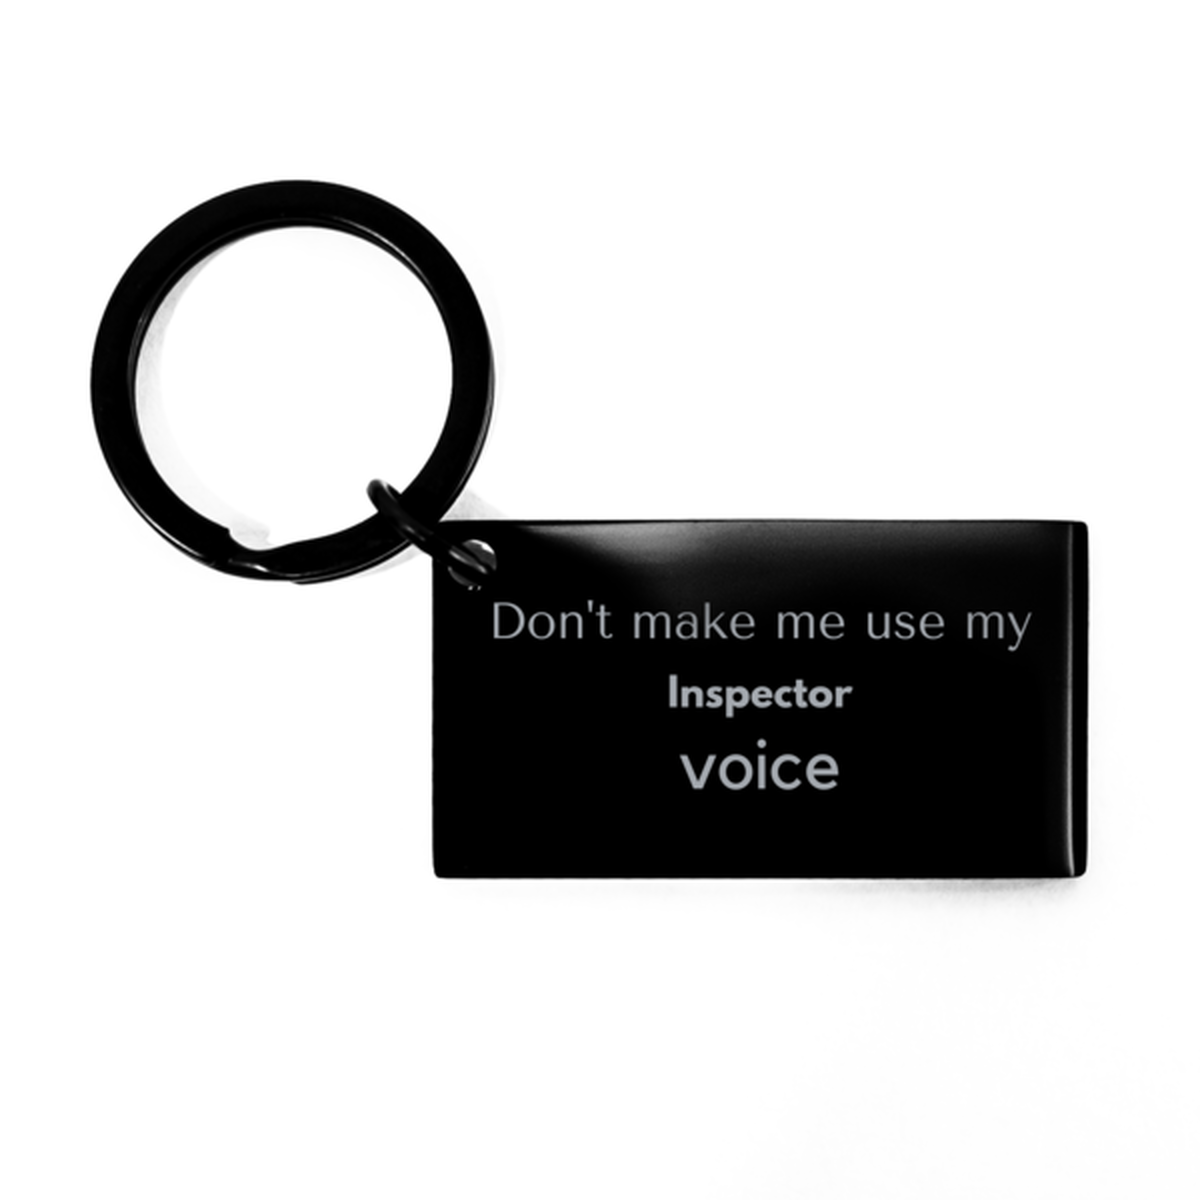 Don't make me use my Inspector voice, Sarcasm Inspector Gifts, Christmas Inspector Keychain Birthday Unique Gifts For Inspector Coworkers, Men, Women, Colleague, Friends